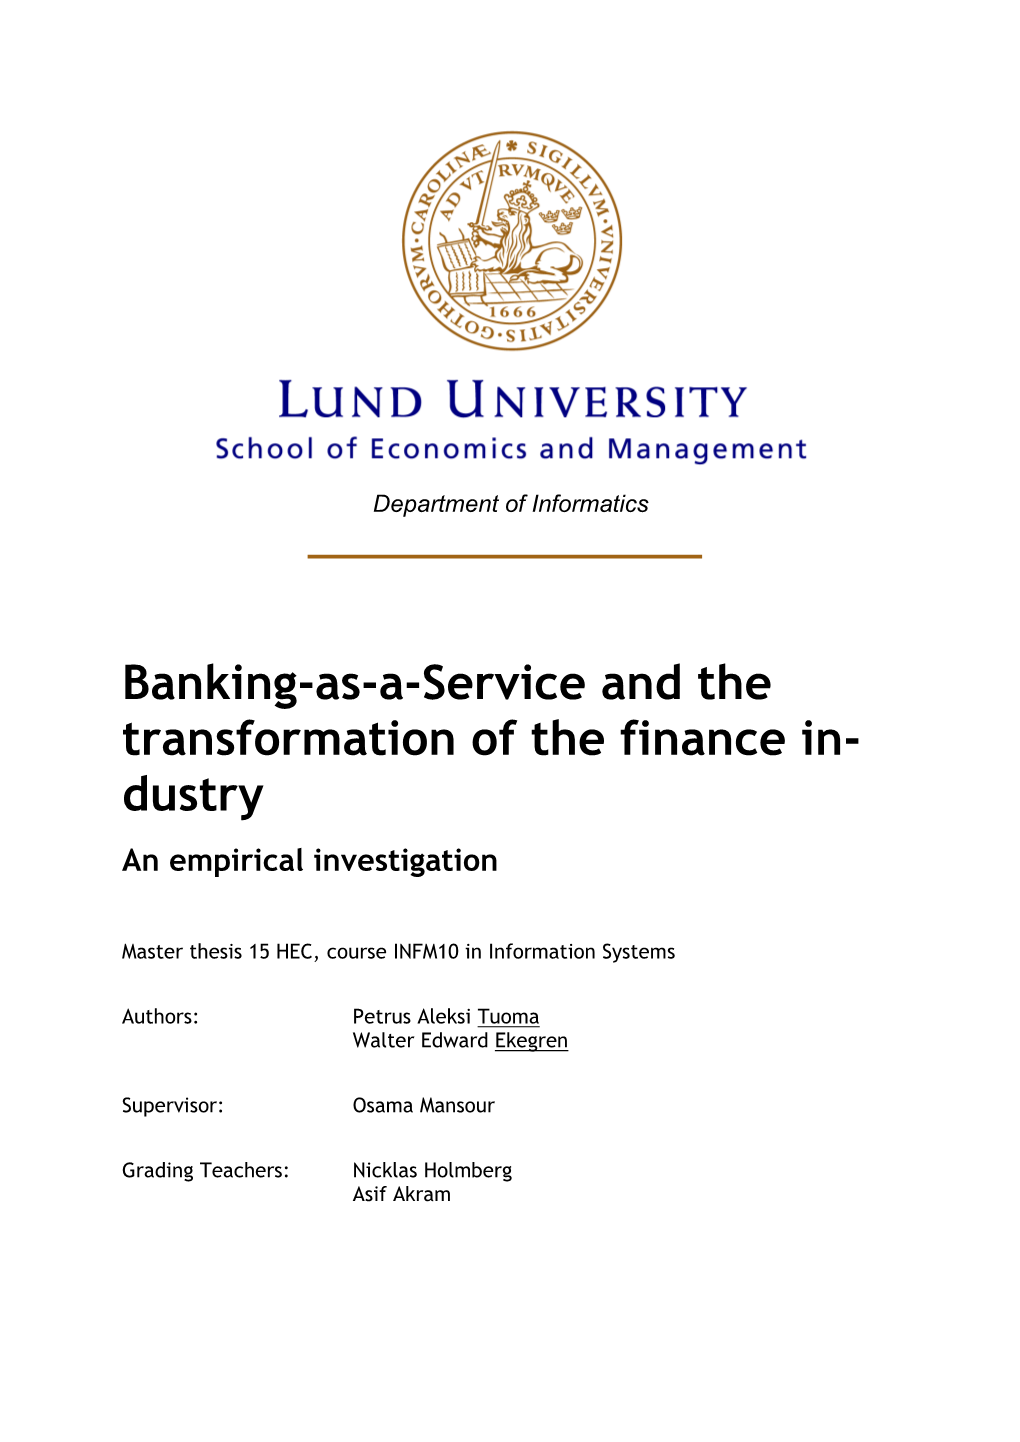 Banking-As-A-Service and the Transformation of the Finance In- Dustry an Empirical Investigation